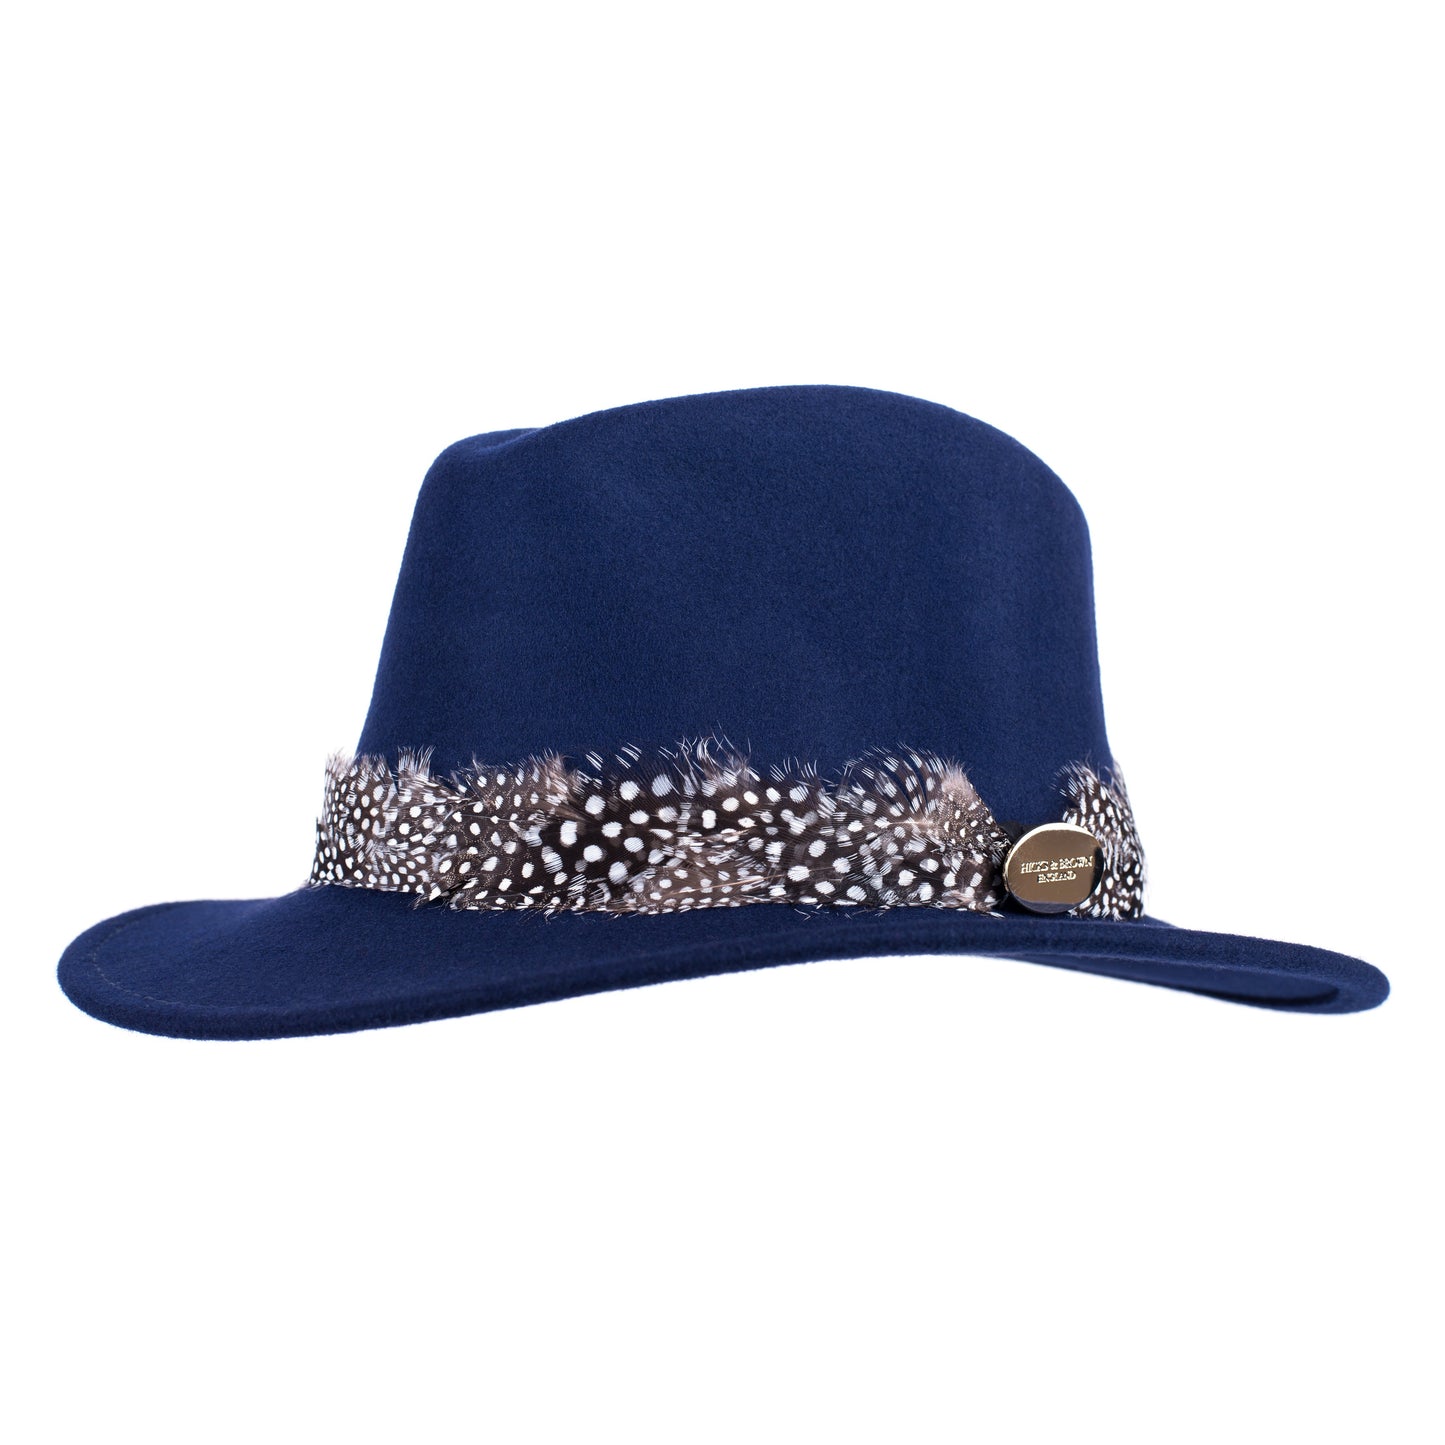 Hicks & Brown Fedora The Suffolk Fedora in Navy (Guinea Feather Wrap)